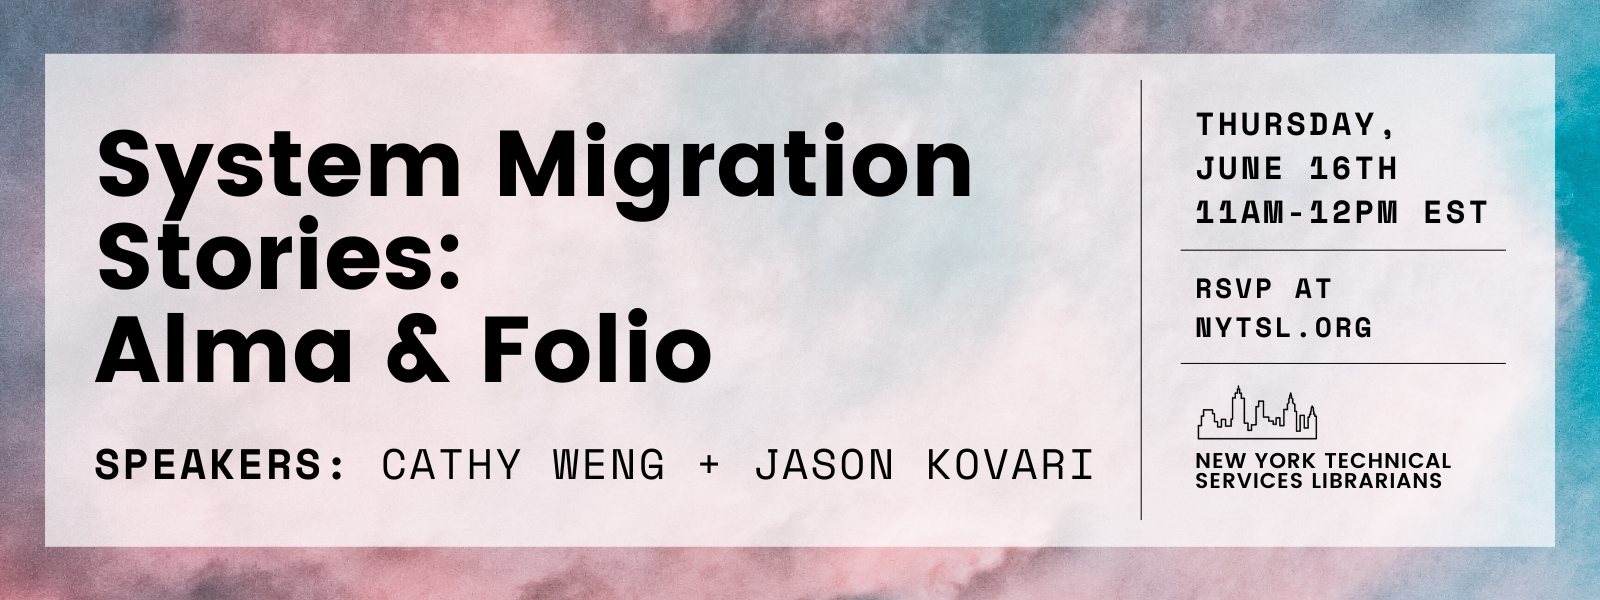 Image Description: Background rectangle of pink and blue cloudy sky with translucent white rectangle centered within. Large bold text in black at upper left reads “System Migration Stories: Alma & Folio” followed by monospace text that reads “Speakers: Cathy Weng + Jason Kovari”. Thin line separating the left two thirds of the image from the right one third of the image. Top right of the image reads “Thursday, June 16th 11am-12pm EST” in bold monospace black text followed by a thin dividing line, followed by “RSVP at NYTSL.ORG” also in bold monospace black text. Bottom right graphic of black outline of New York City skyline followed by dark grey text that reads “New York Technical Services Librarians”. End of image description.